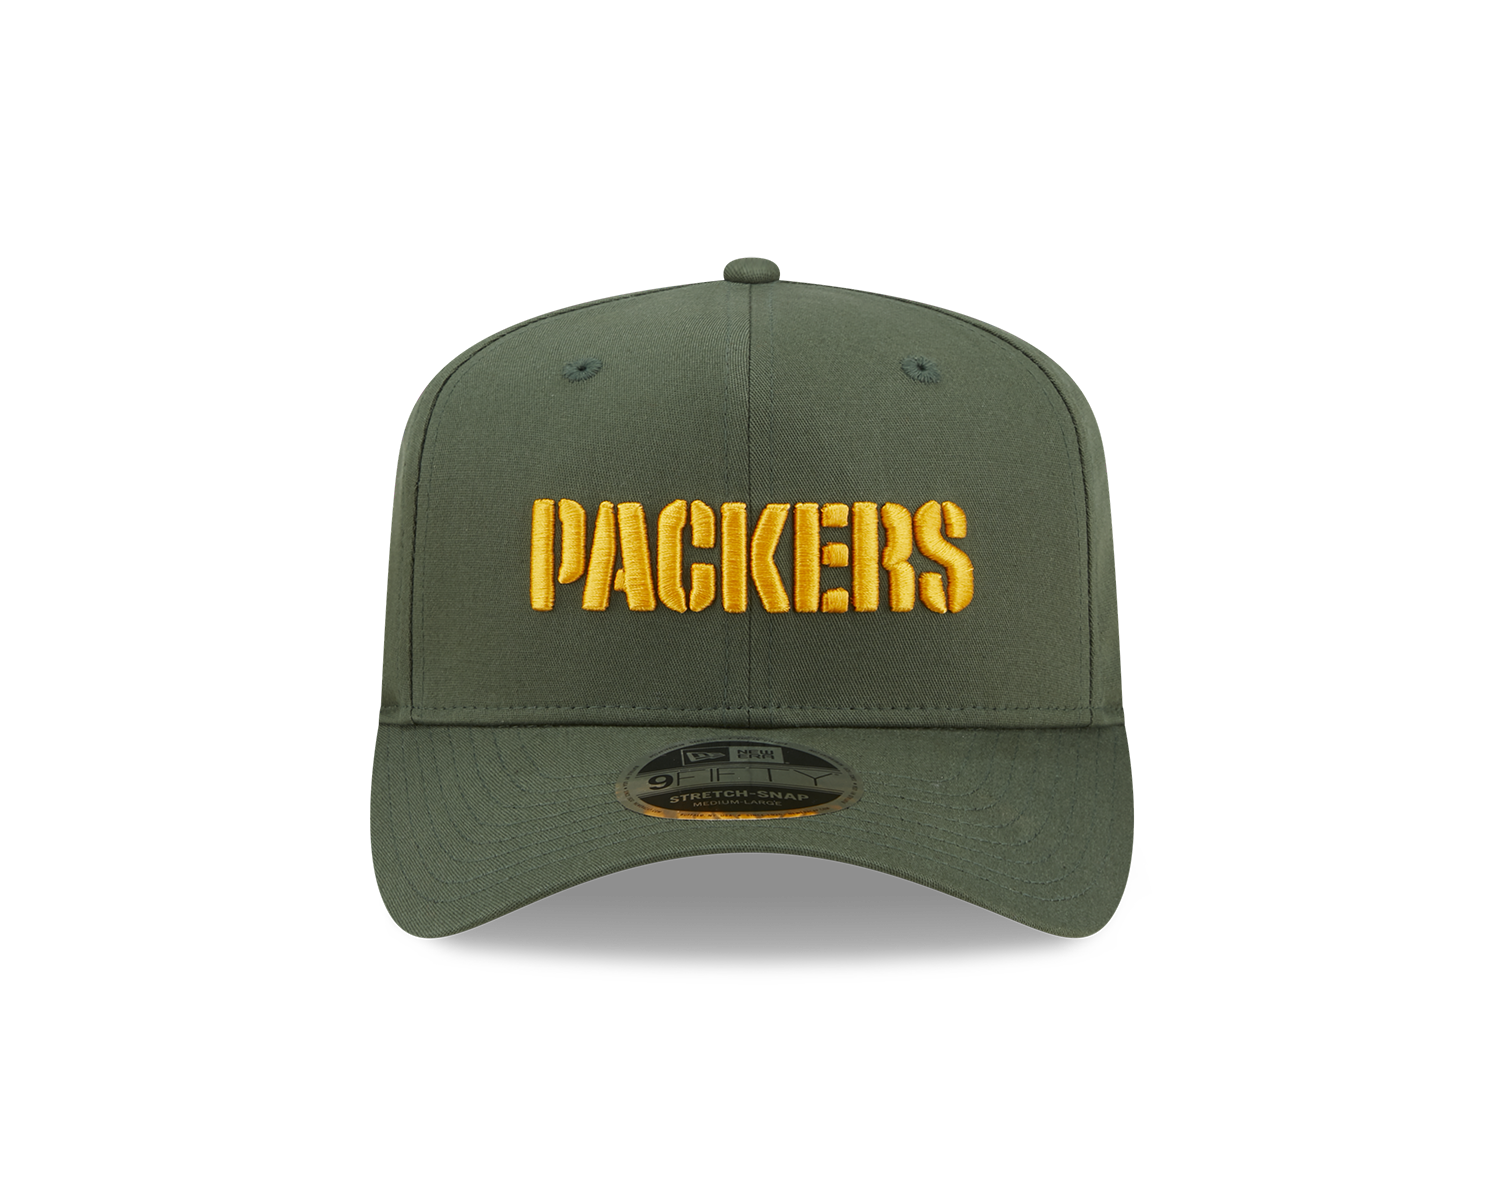 Team Wordmark 9Fifty Stretch Snap - Green Bay Packers Cilantro Green